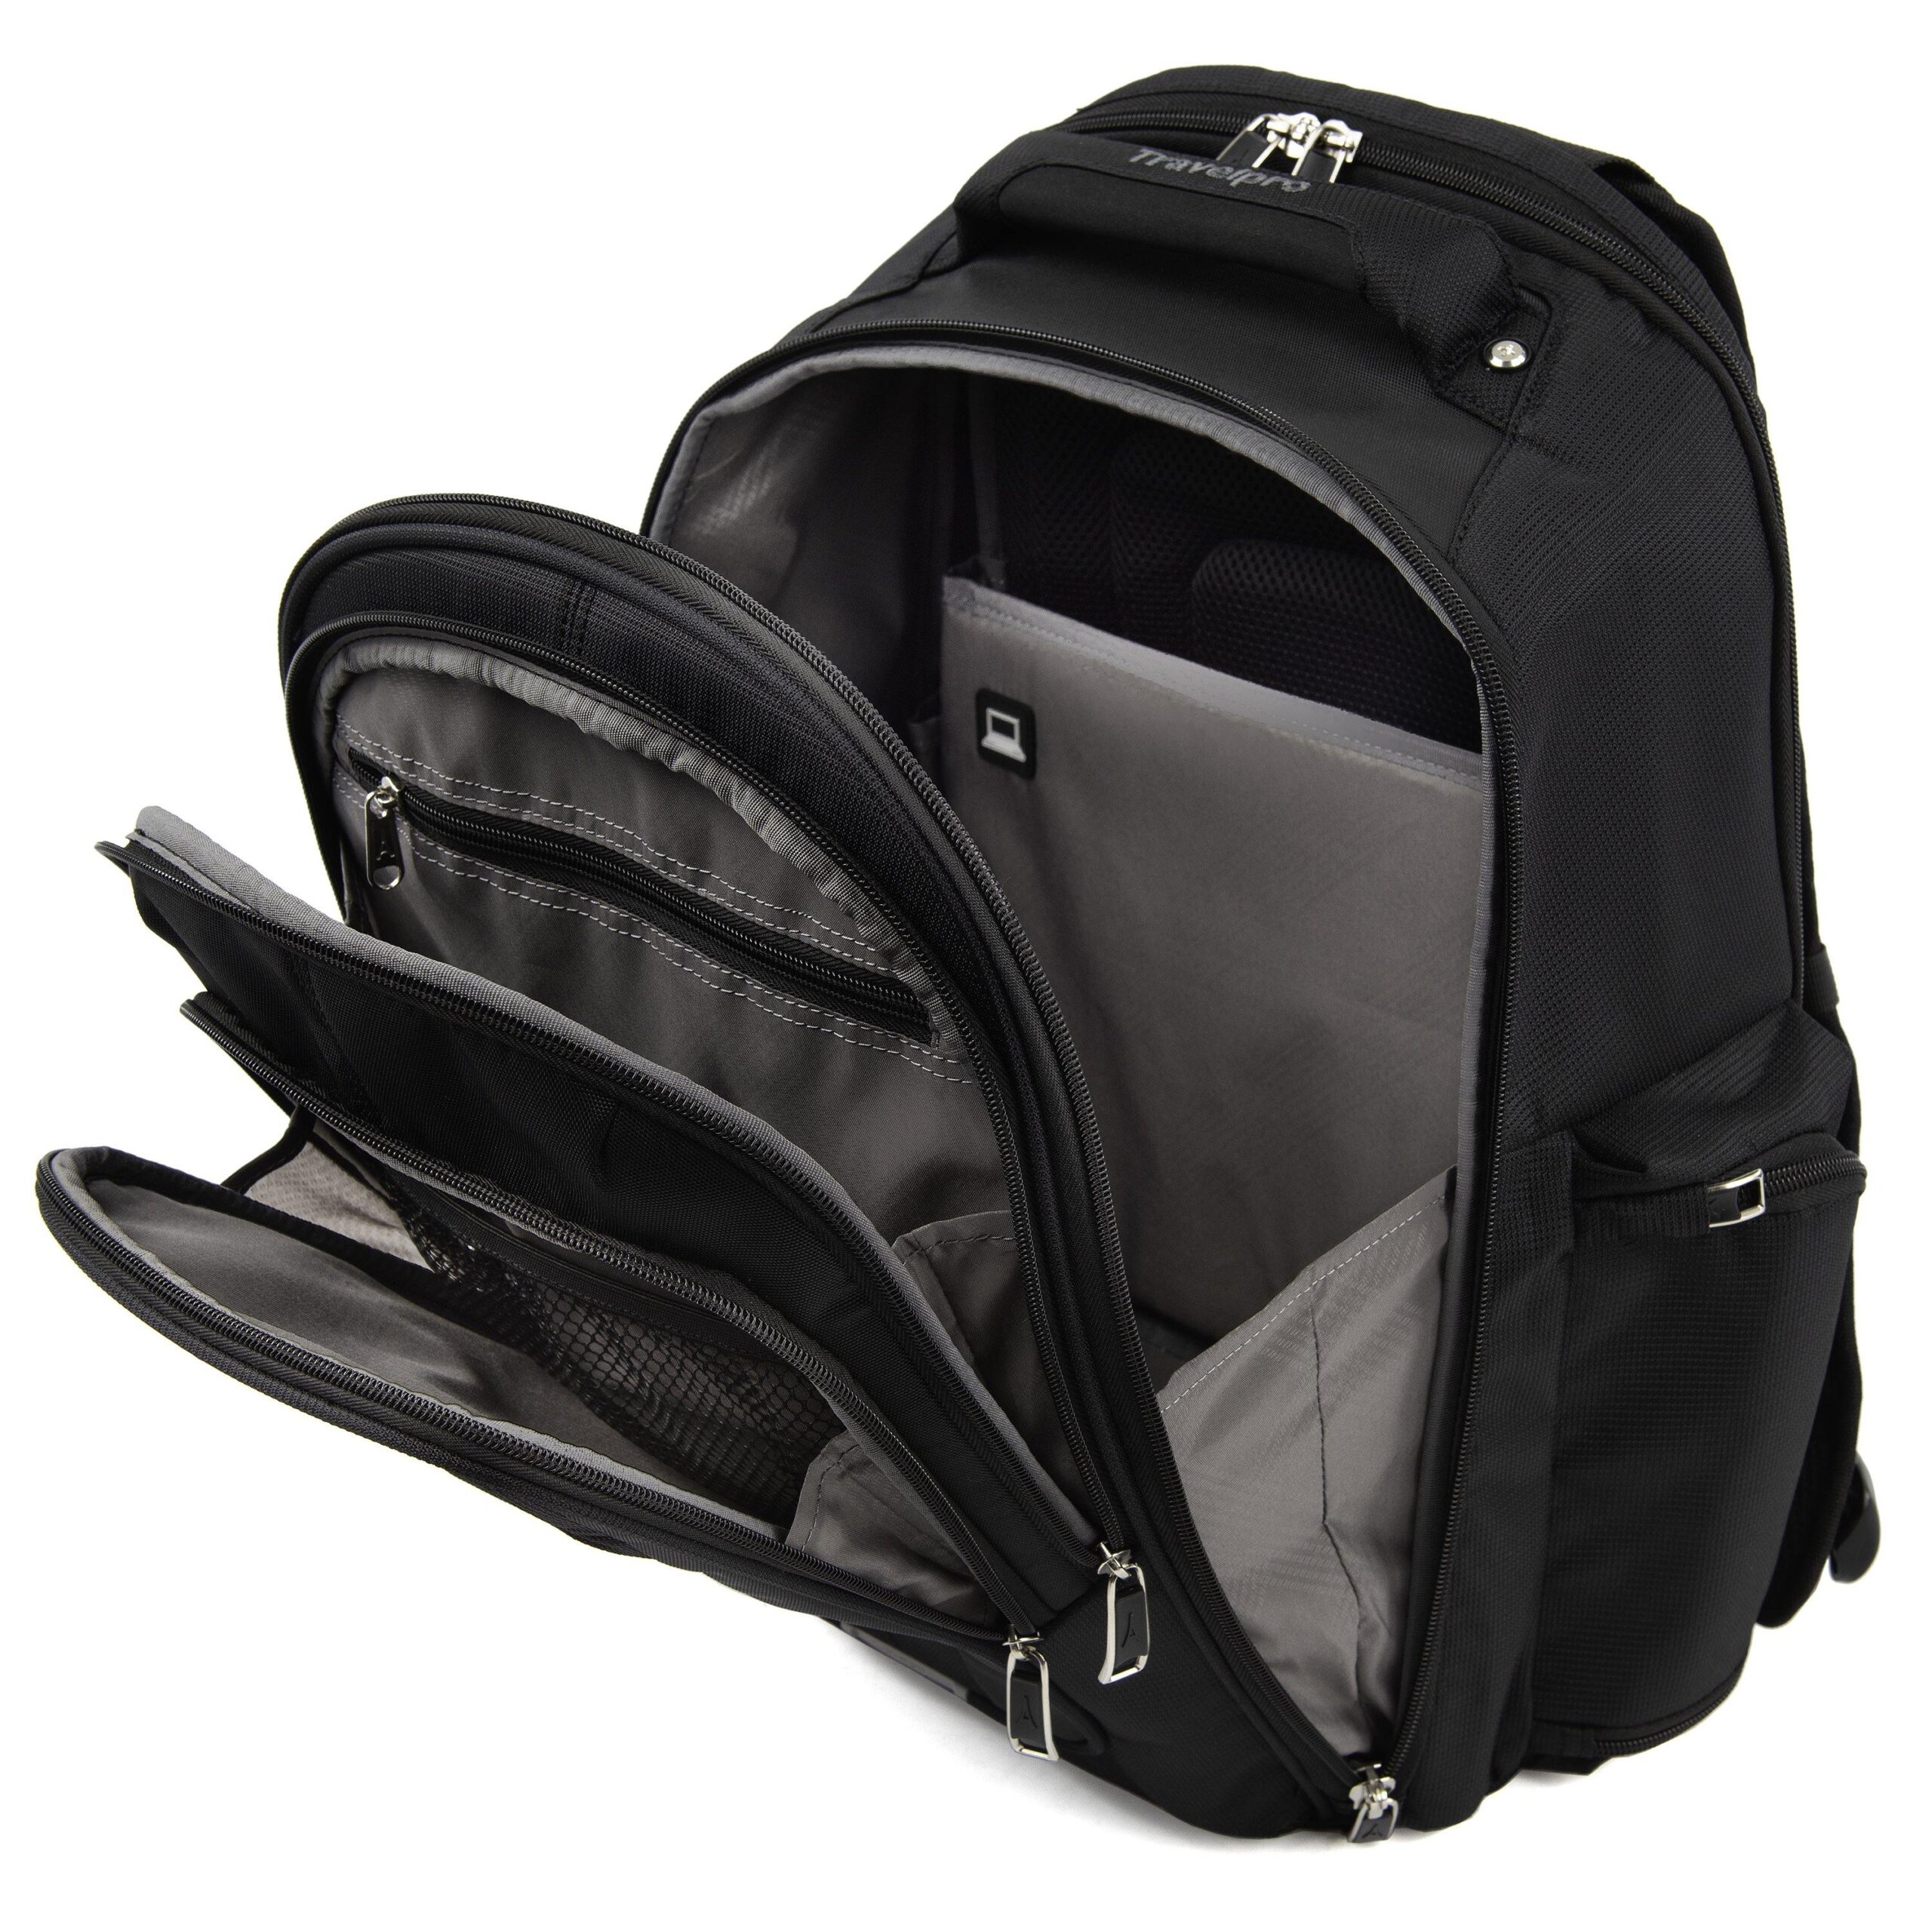 The Tech Commuter’s Dream – Reviewing The Travelpro Laptop Backpack